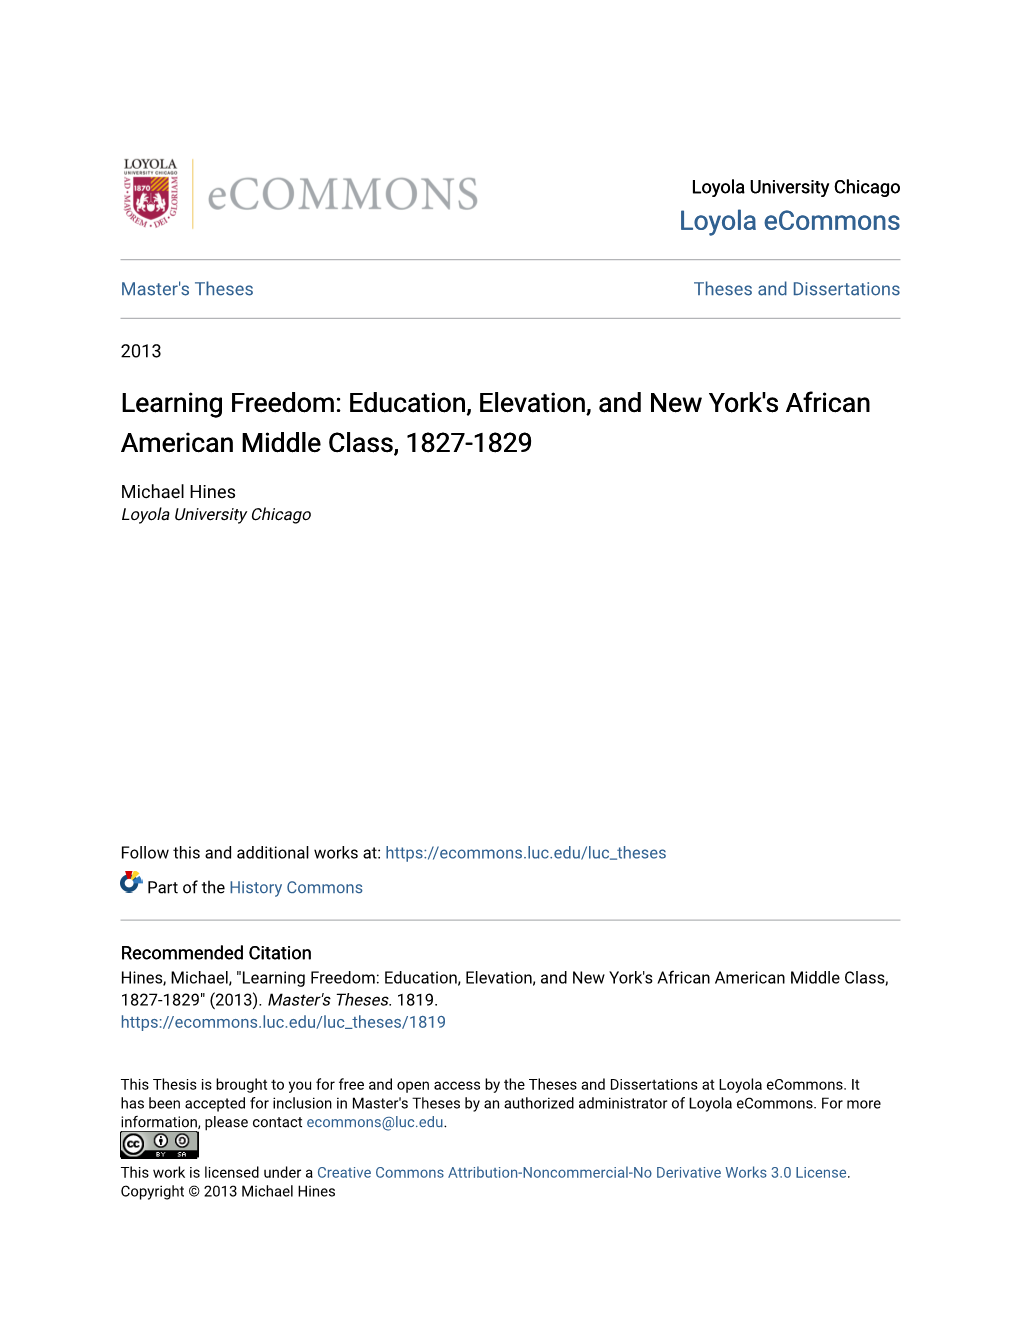 Education, Elevation, and New York's African American Middle Class, 1827-1829